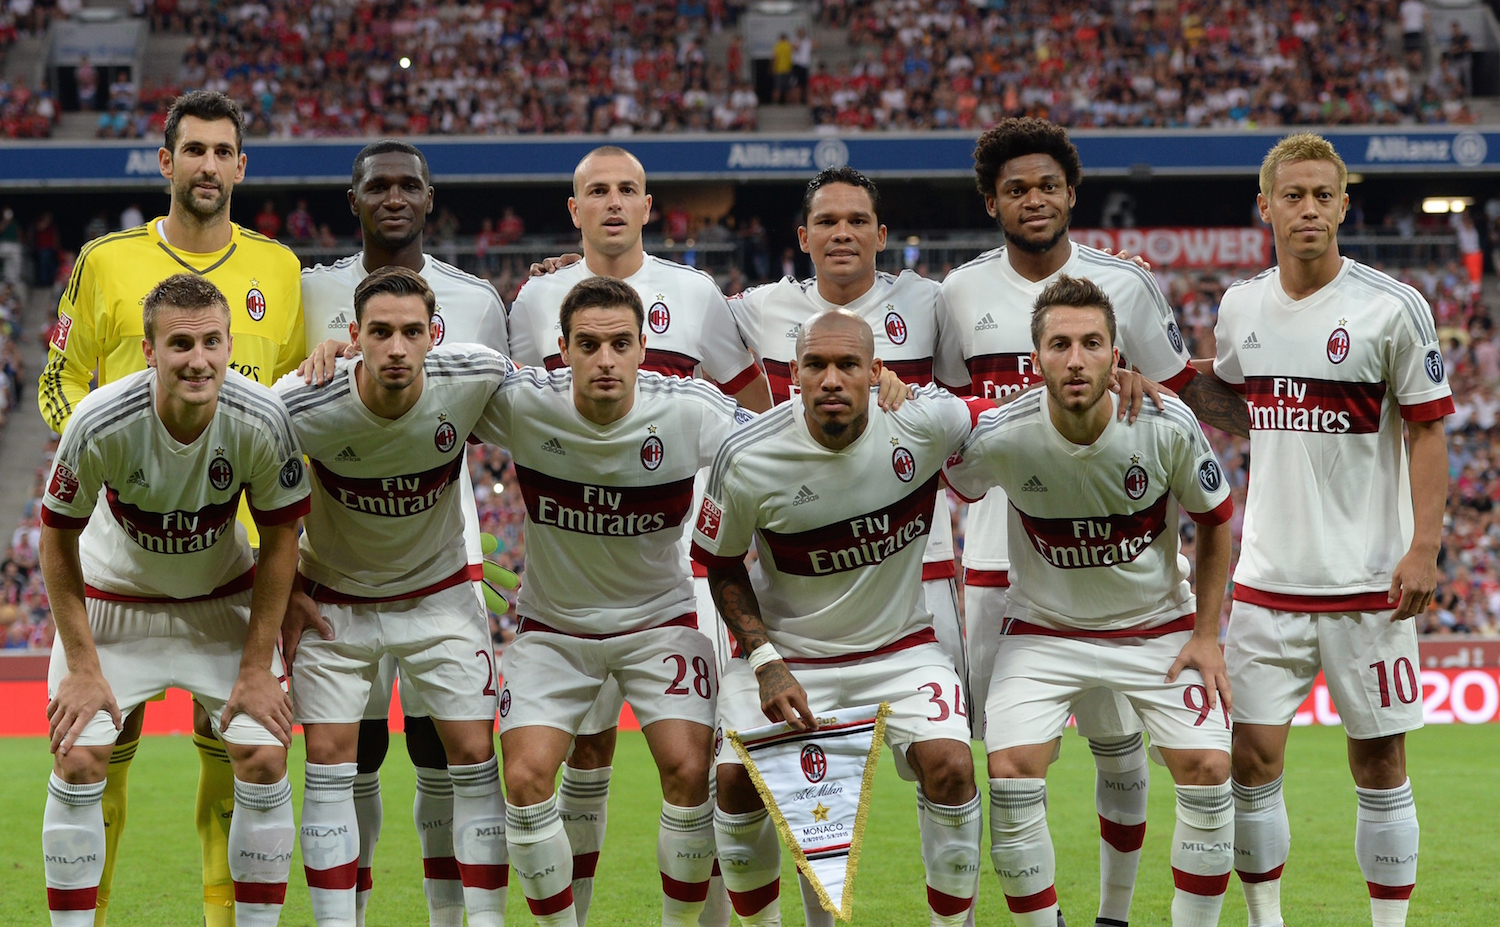 Milan in 2015 Audi Cup action. | CHRISTOF STACHE/AFP/Getty Images